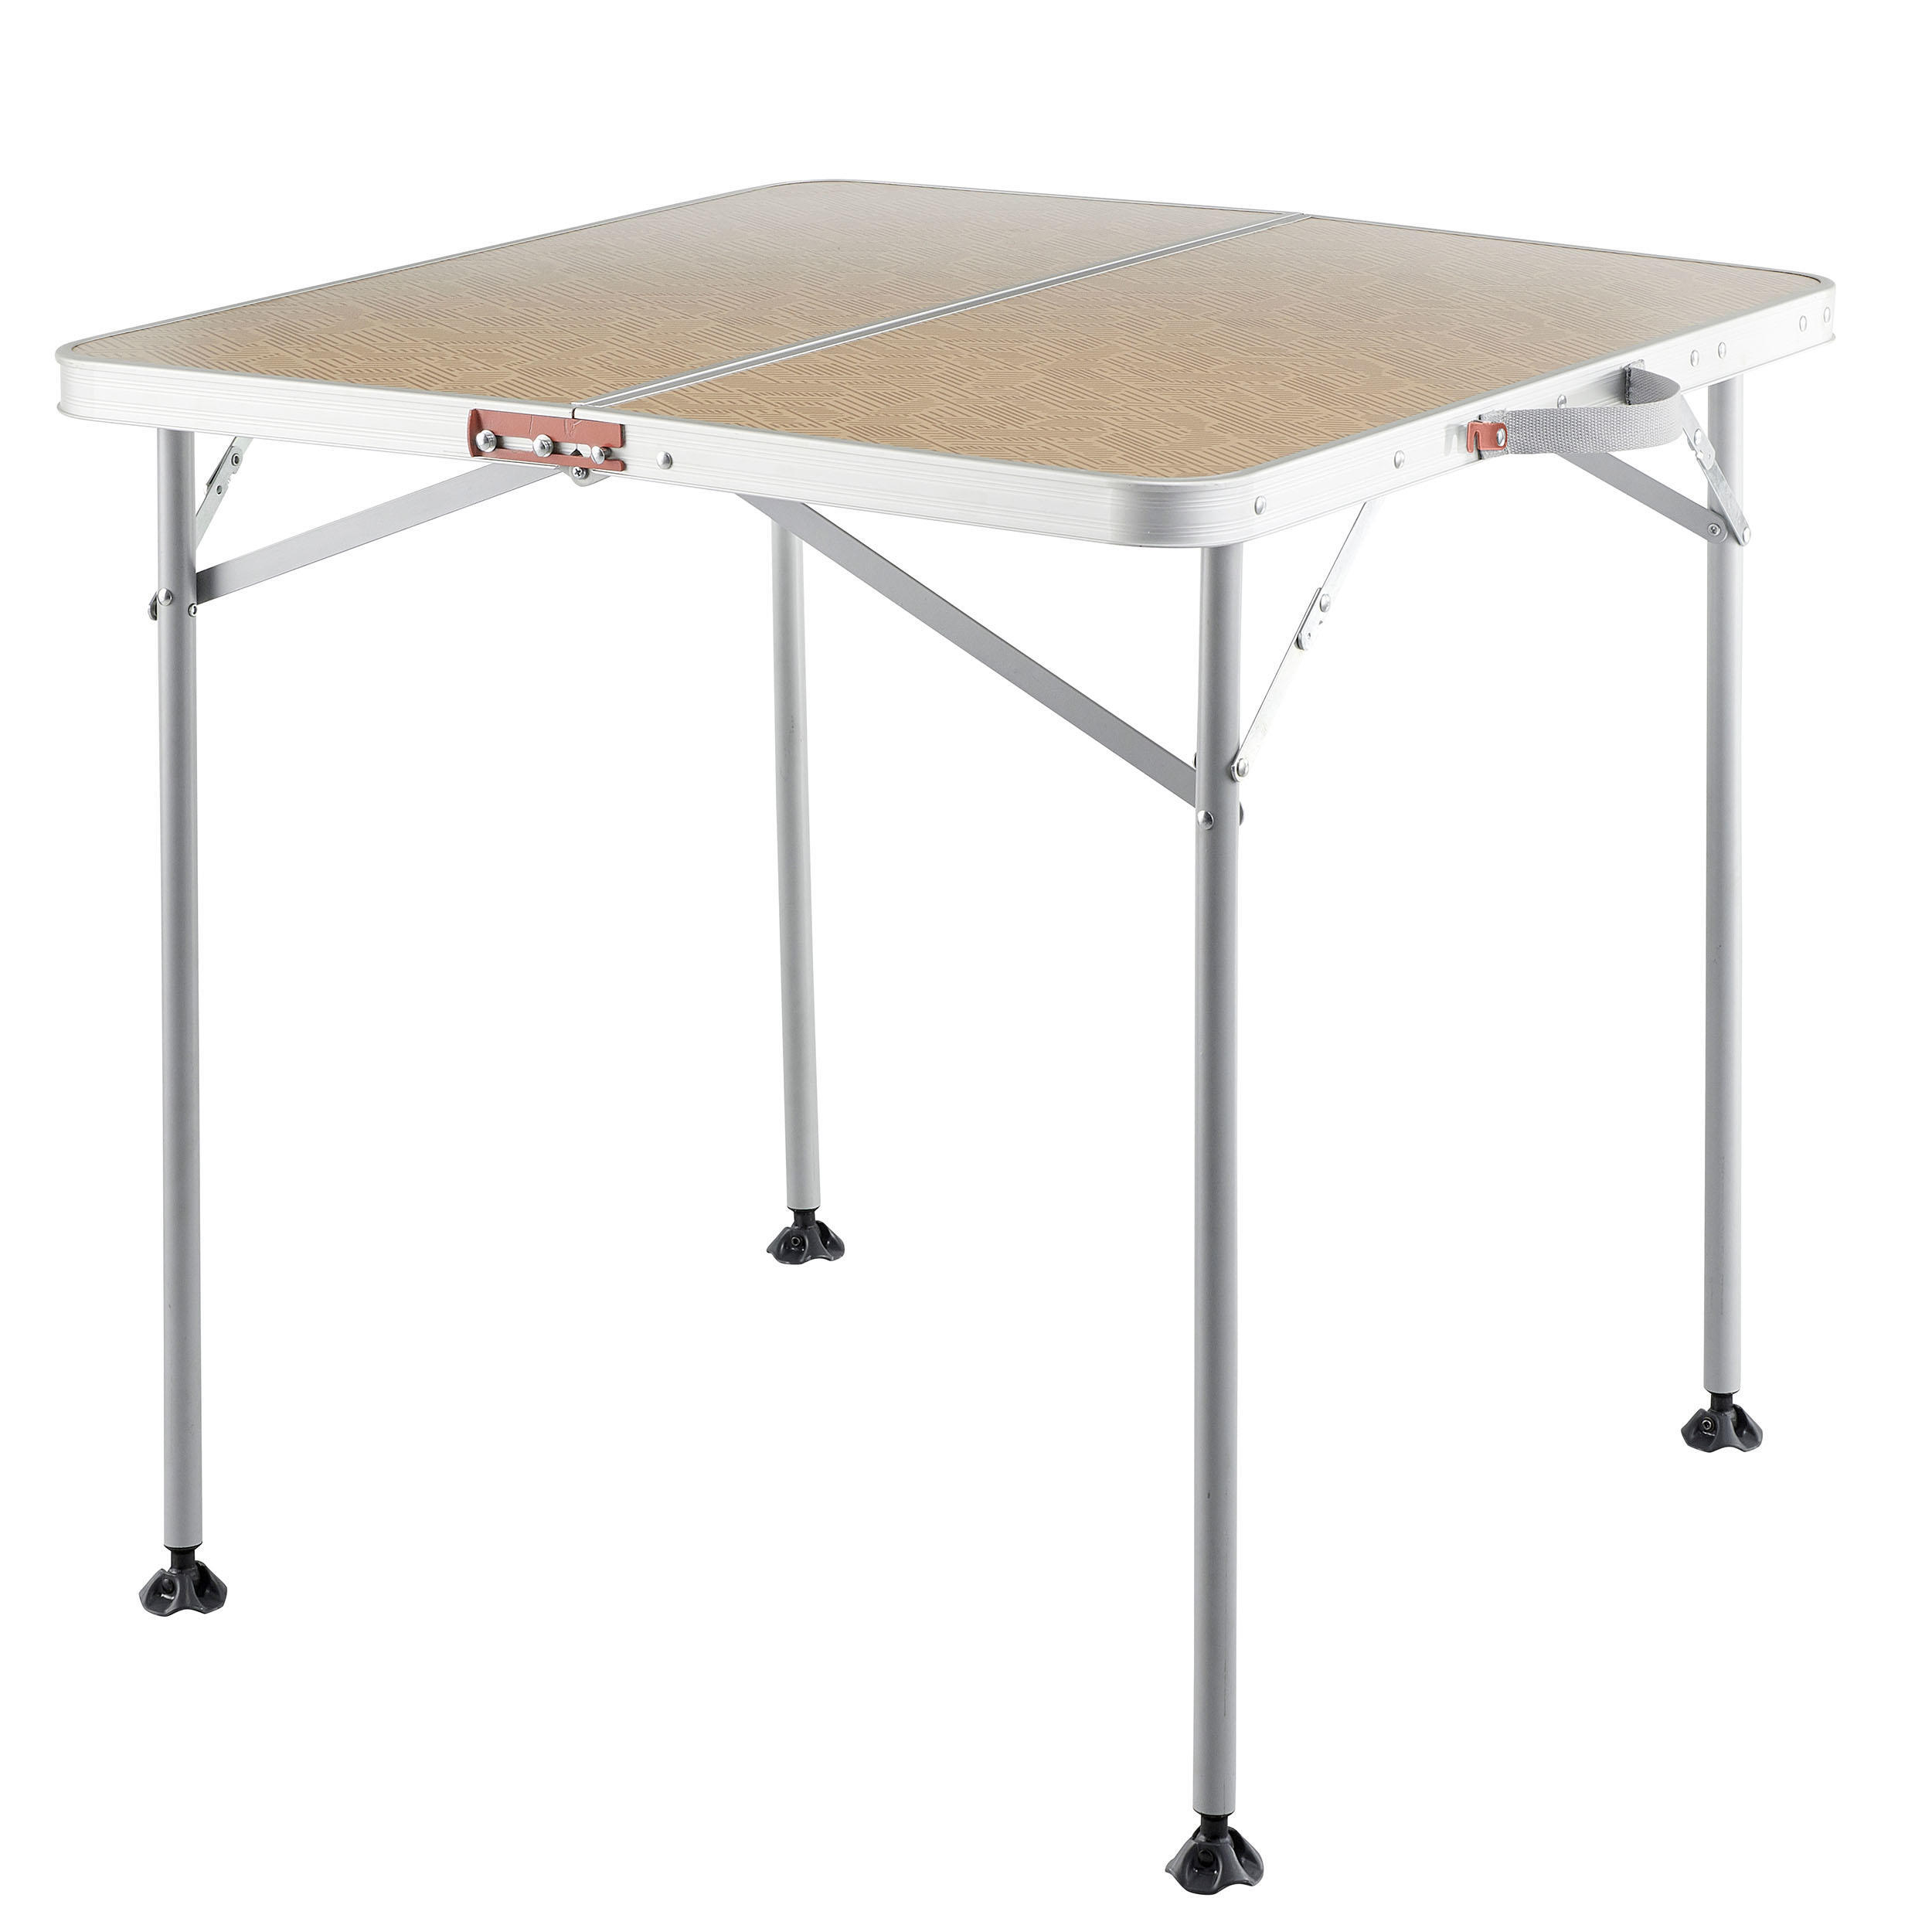 QUECHUA FOLDING CAMPING TABLE - 4 PEOPLE